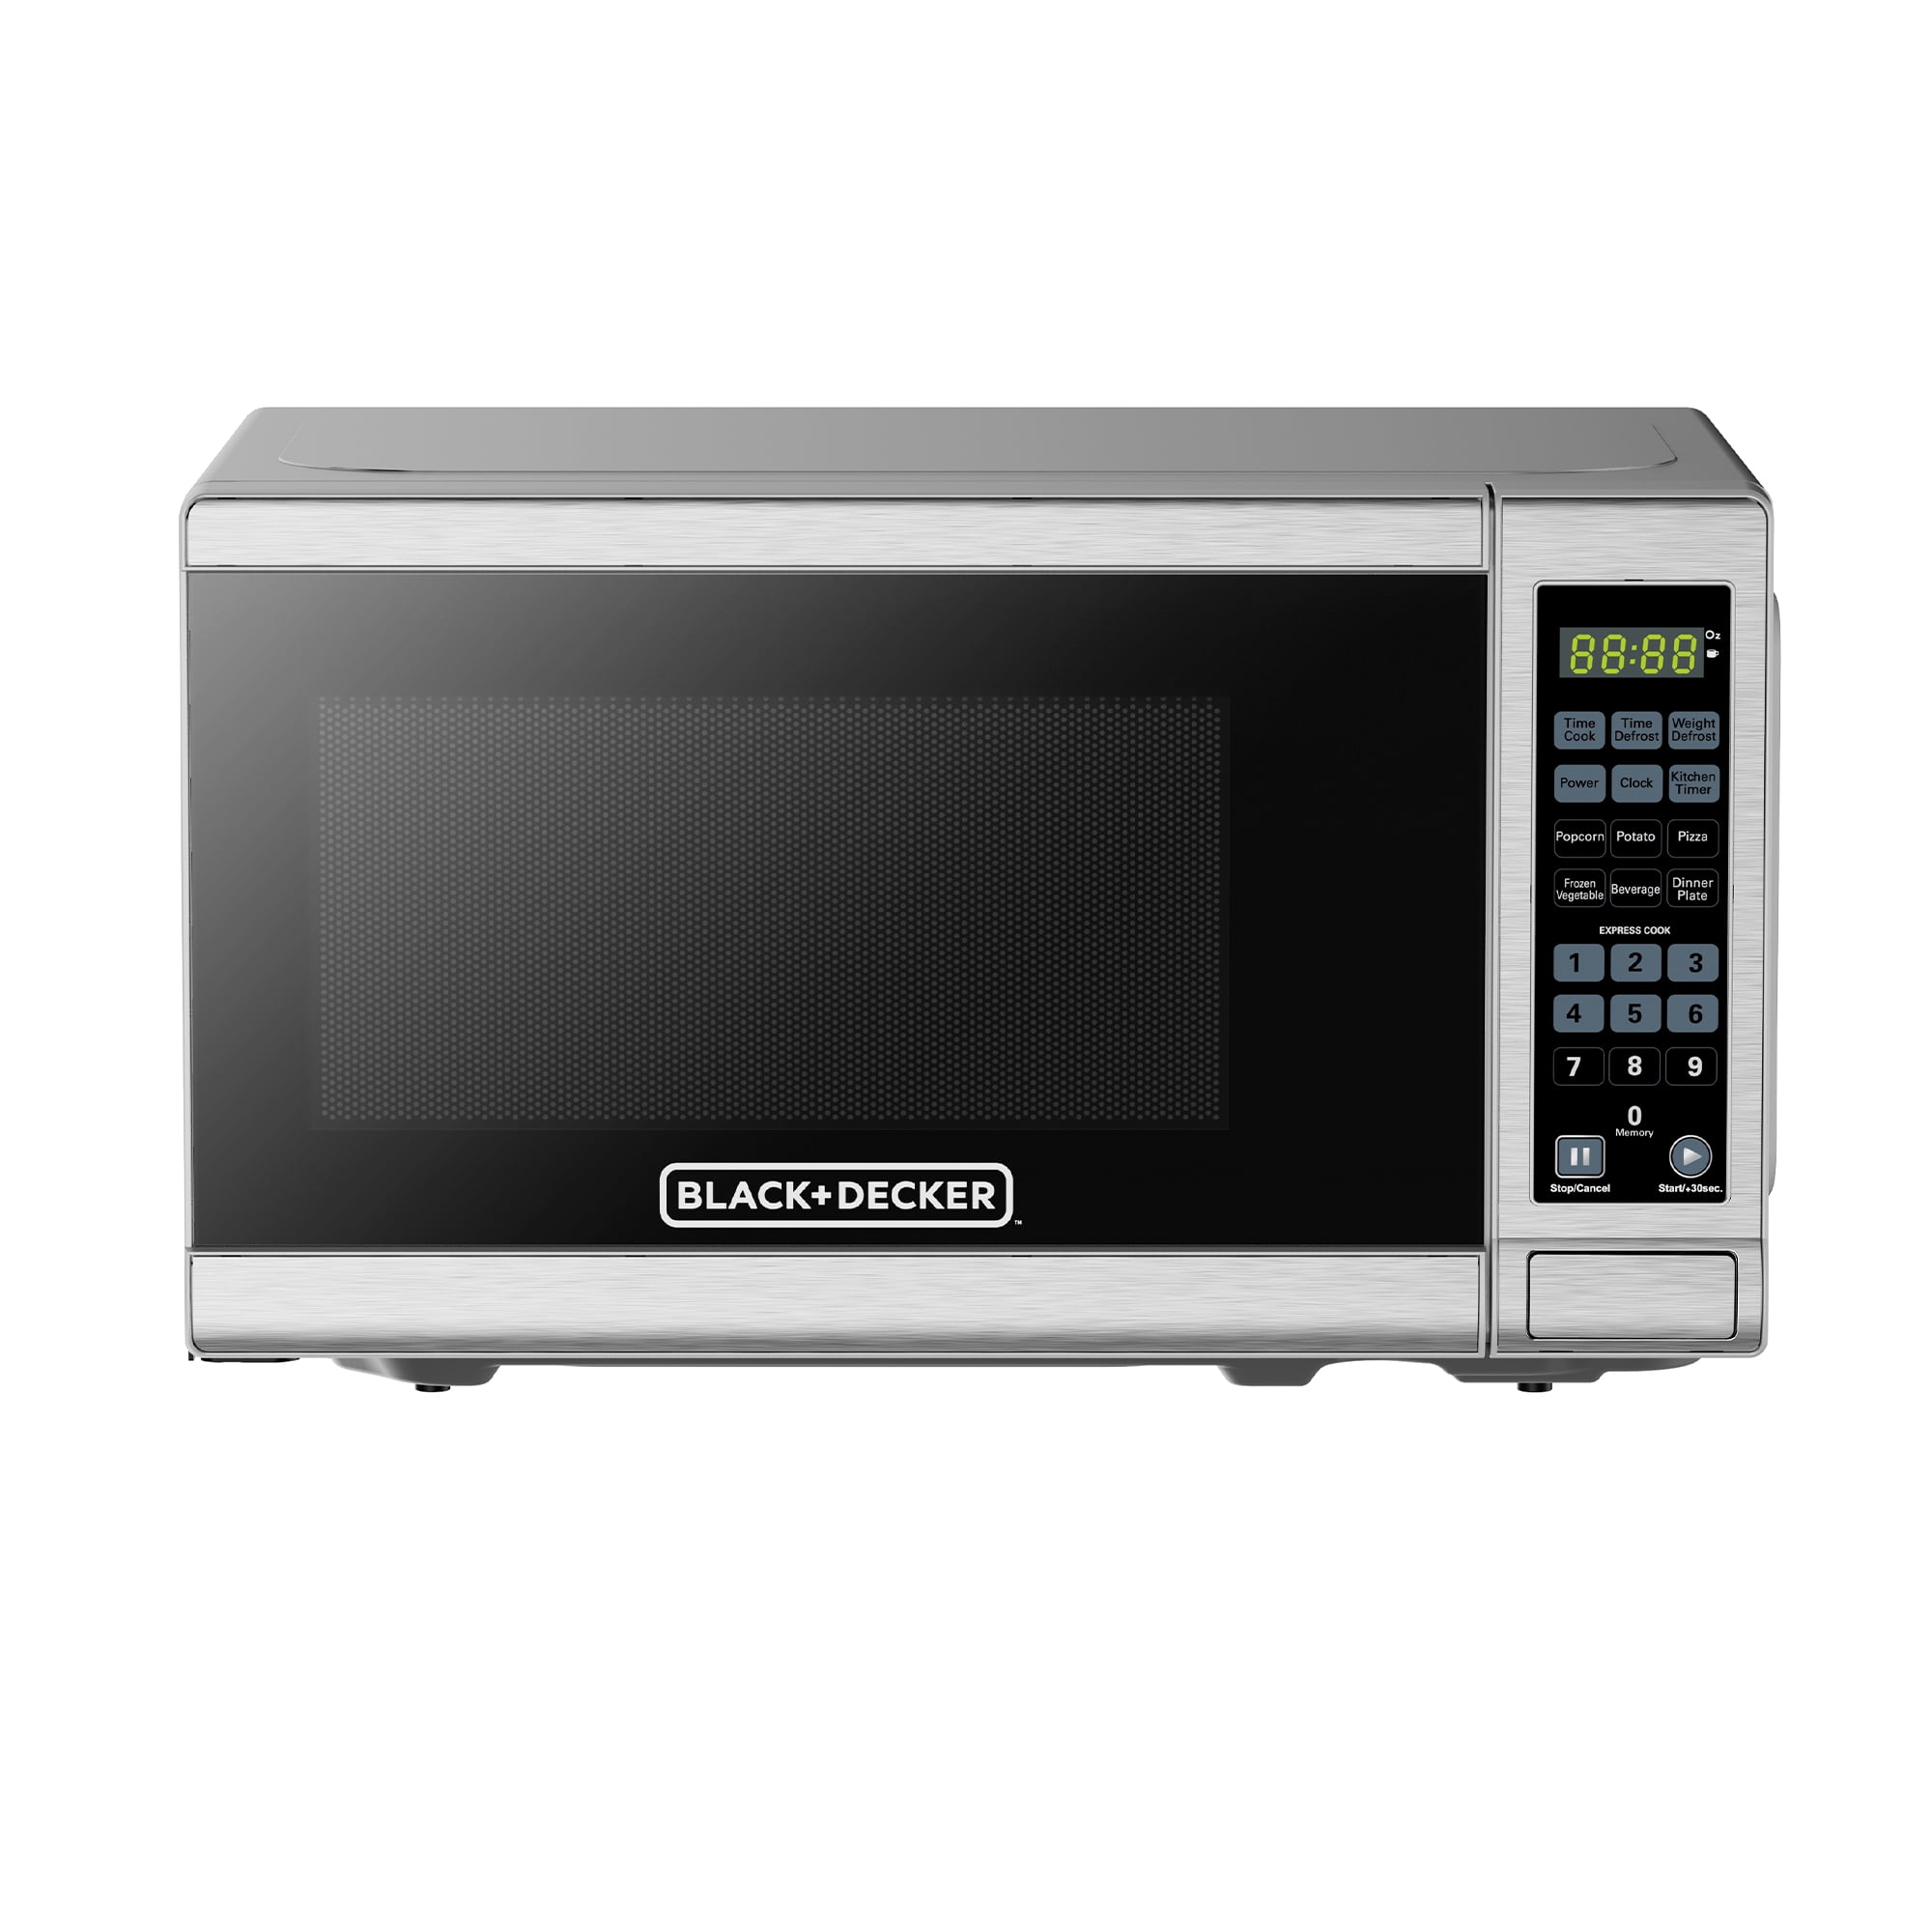 Black Microwave Ovens Countertop, BTMWAY 700 Watt Microwave Oven 0.7 Cu.Ft,  Mechanical Dials Small Microwave Oven with 6 Power Levels, Durable Microwave  Oven for Home, Office, Apartment, Dorm, R1161 